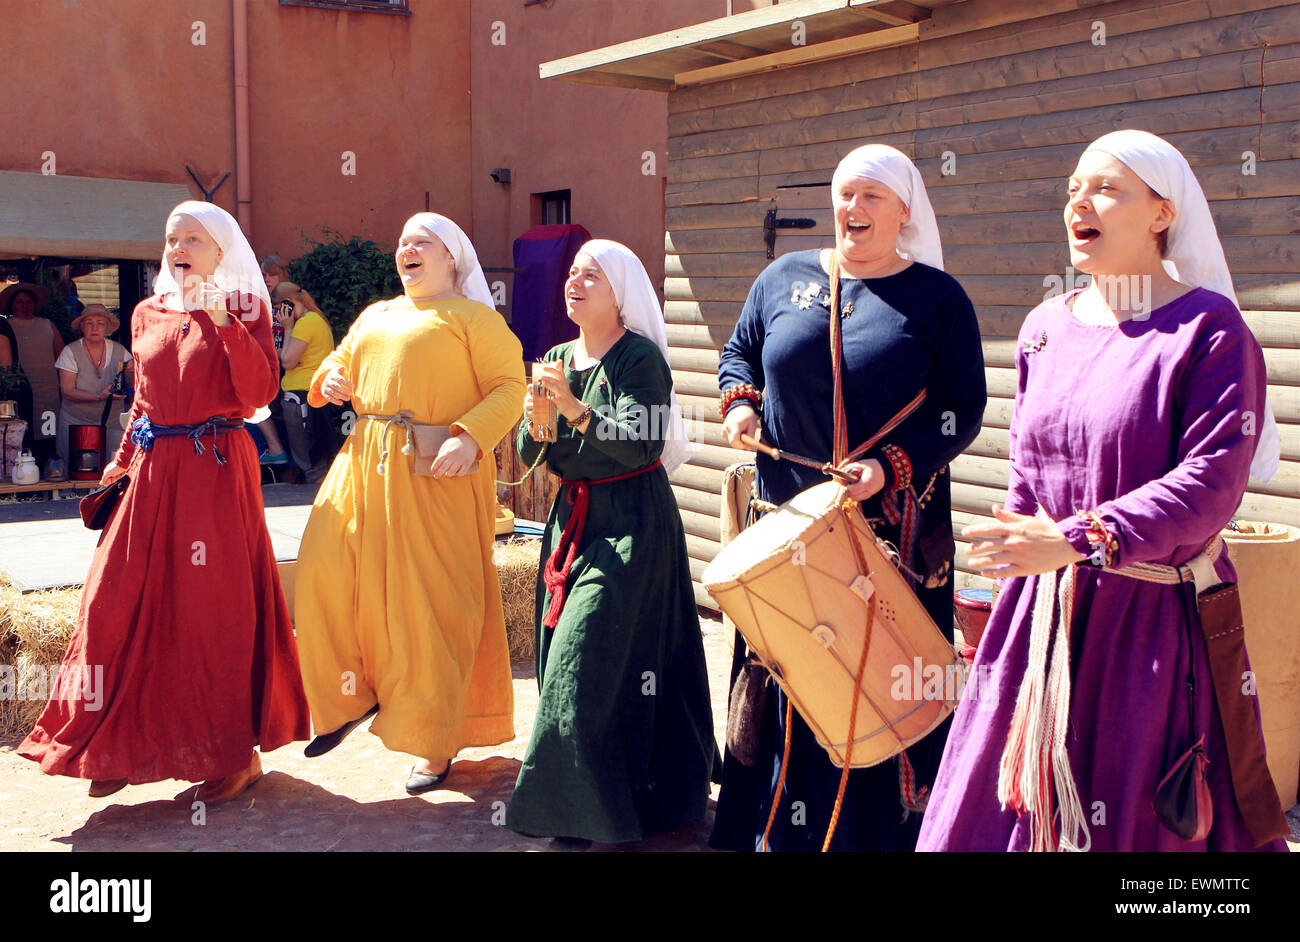 (150629) -- TURKU, June 29, 2015(Xinhua) -- Some women dressed in traditional clothes sing and dance during the annual Medieval Market, in Turku, southwest Finland, on June 28, 2015. The Medieval Market is Finland's largest medieval and historical event held at the Old Great Square of Turku from June 25 to 28. During the four-day event, merchants sold traditional food and handicrafts, and actors performed scene play dressed in ancient costumes. (Xinhua/Zhang Xuan)(azp) Stock Photo